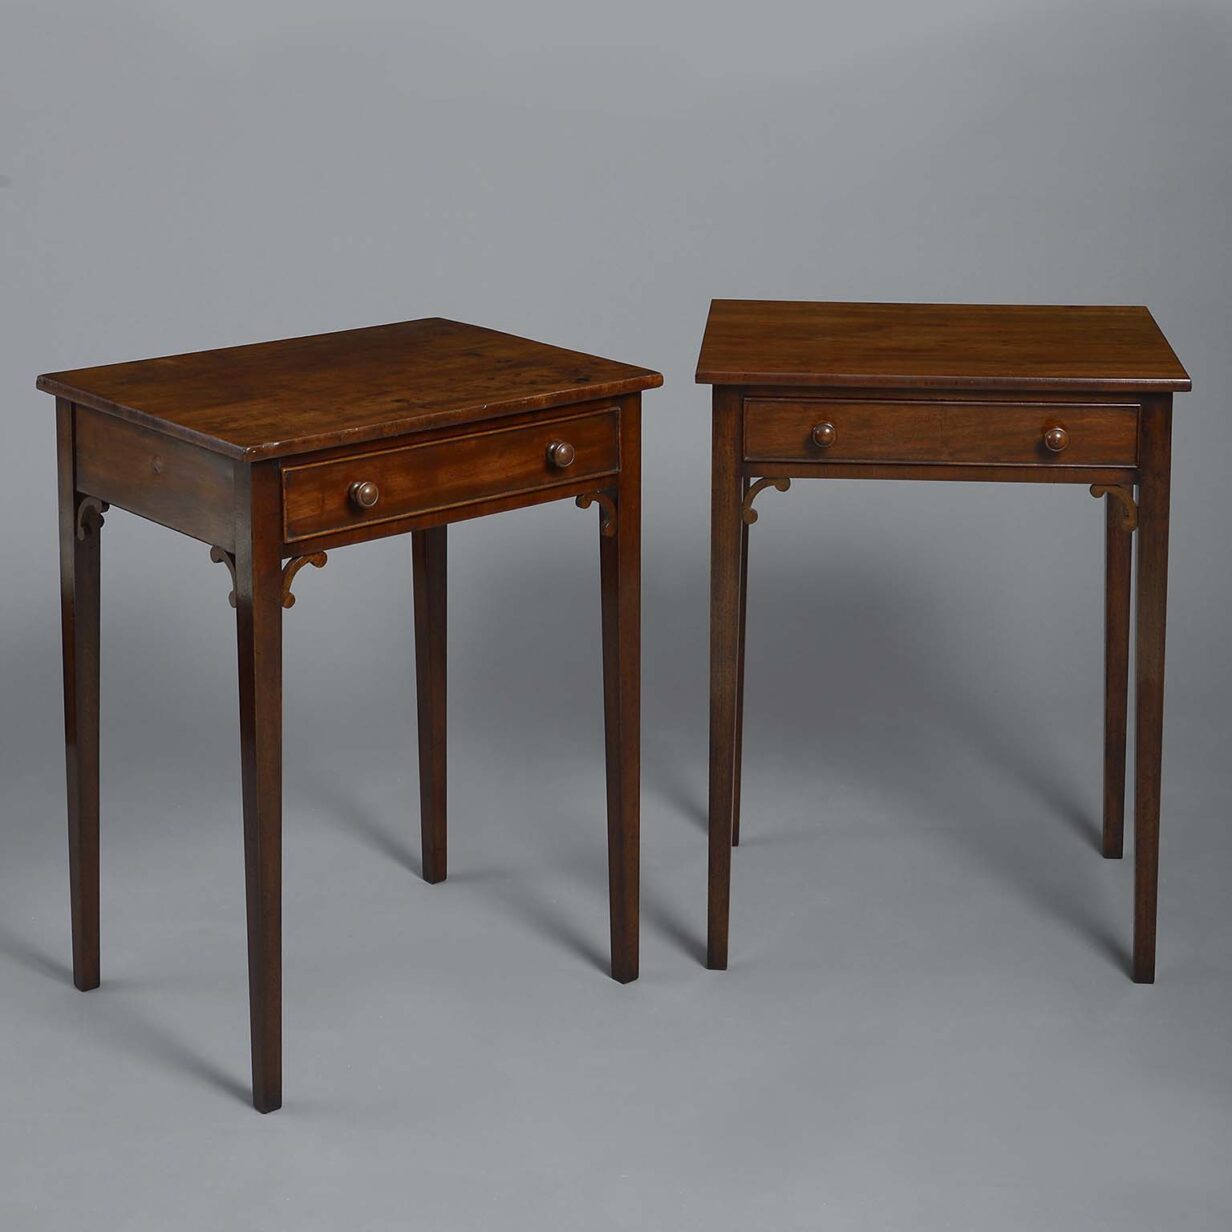 Pair of george iii style mahogany bedside end tables